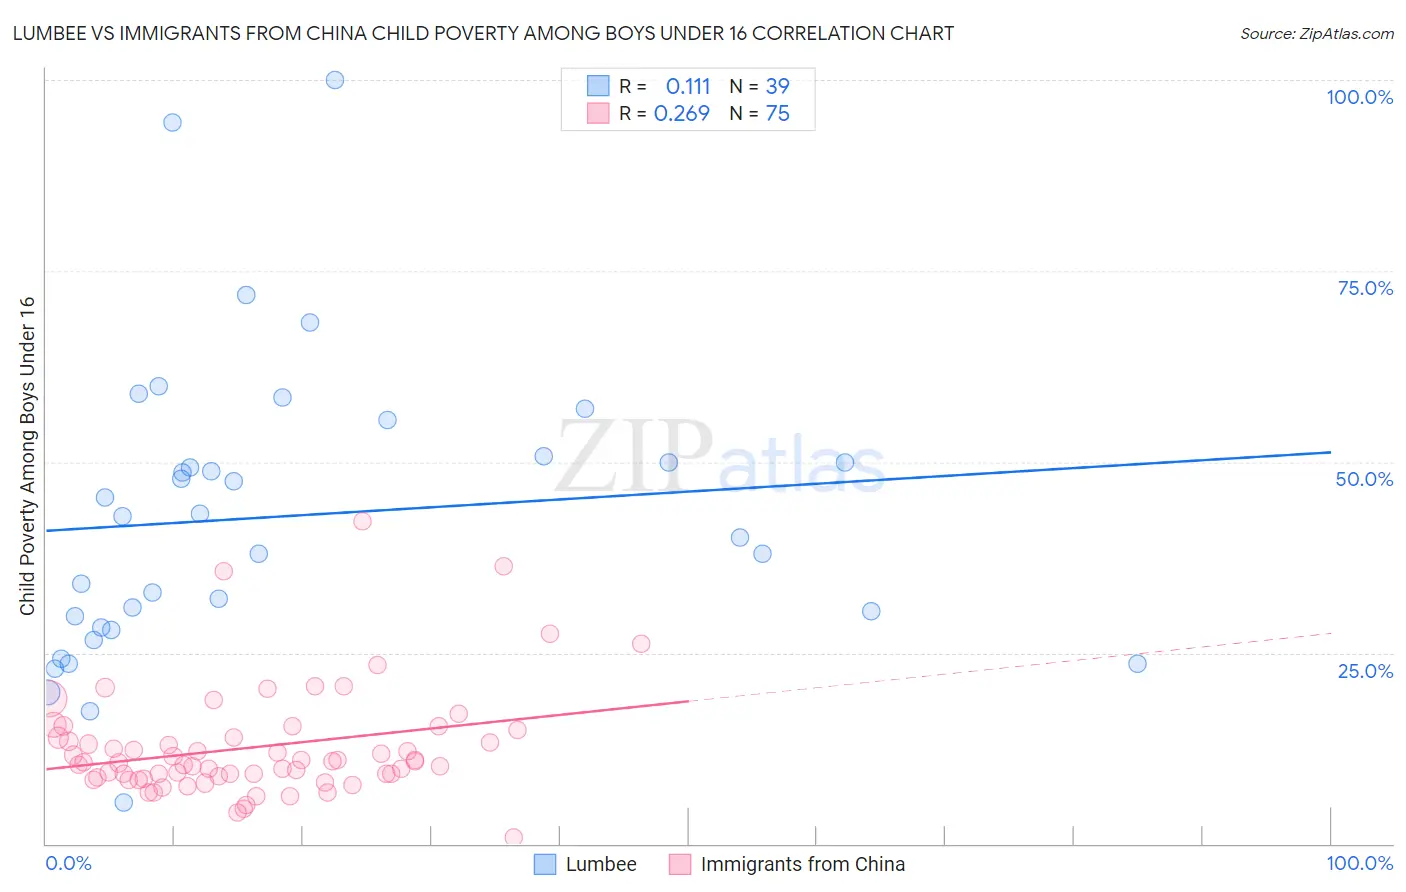 Lumbee vs Immigrants from China Child Poverty Among Boys Under 16